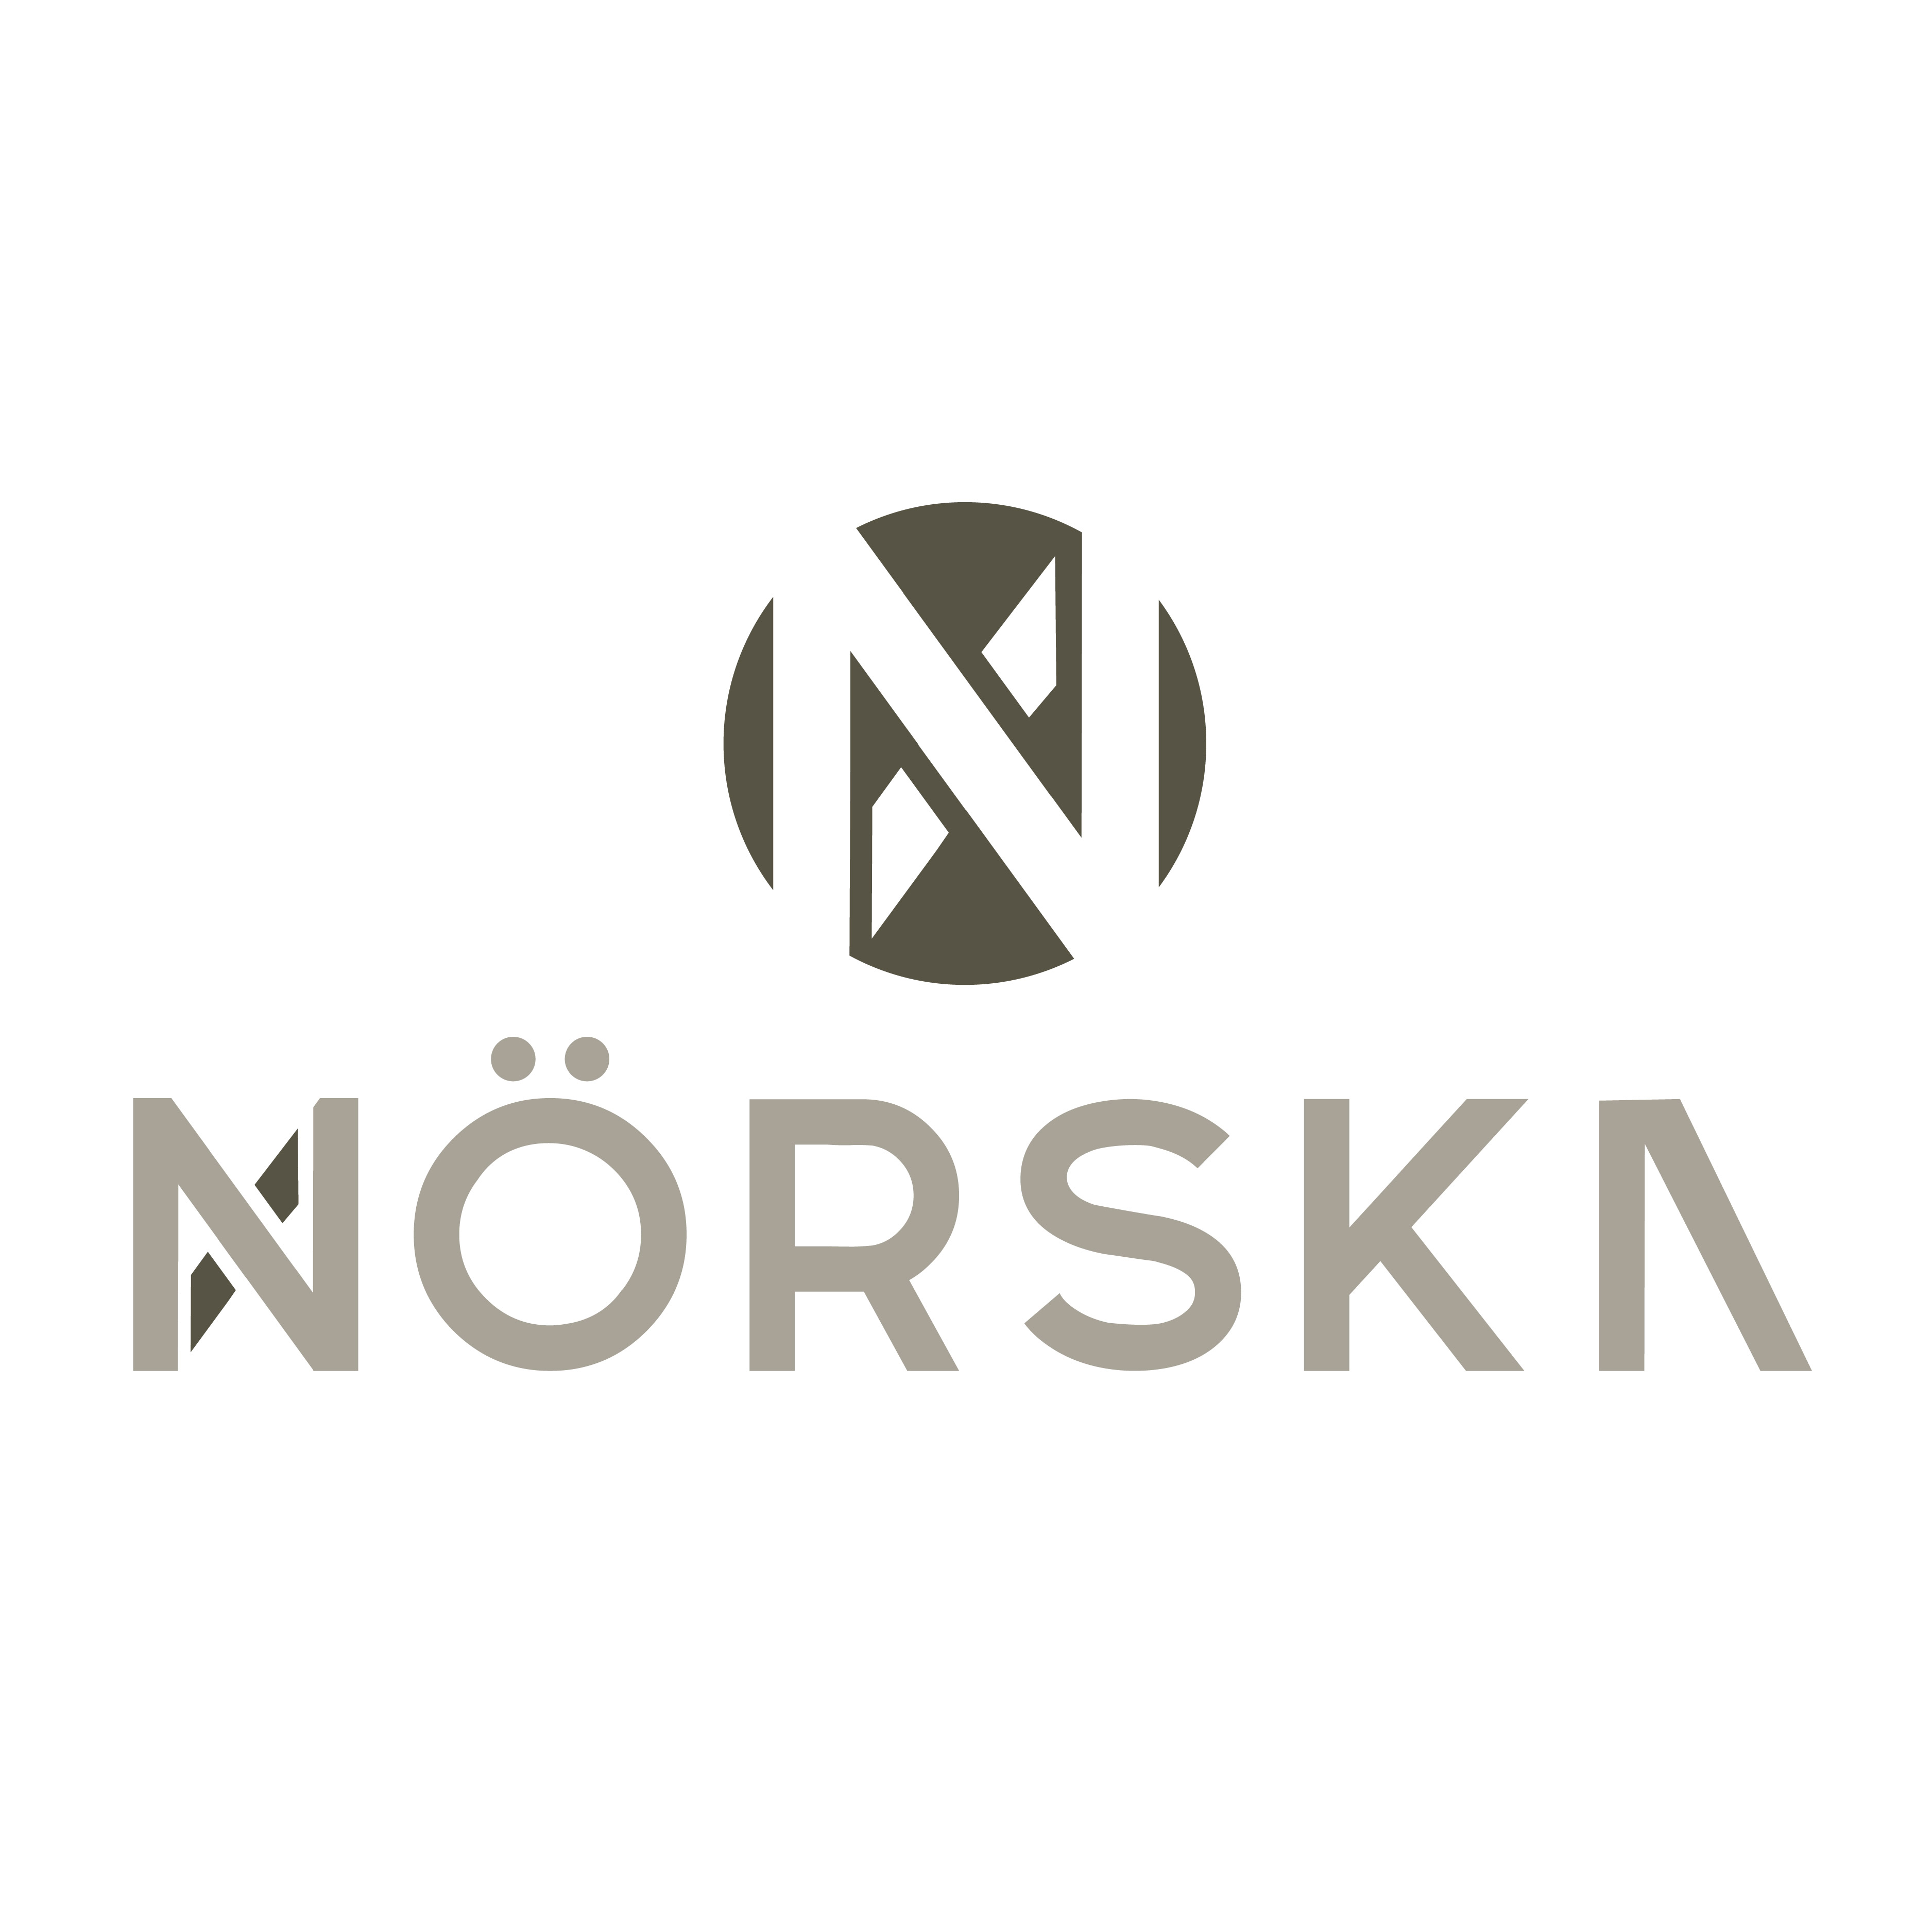 Norska Logo logo design by logo designer Neon Pig Creative for your inspiration and for the worlds largest logo competition